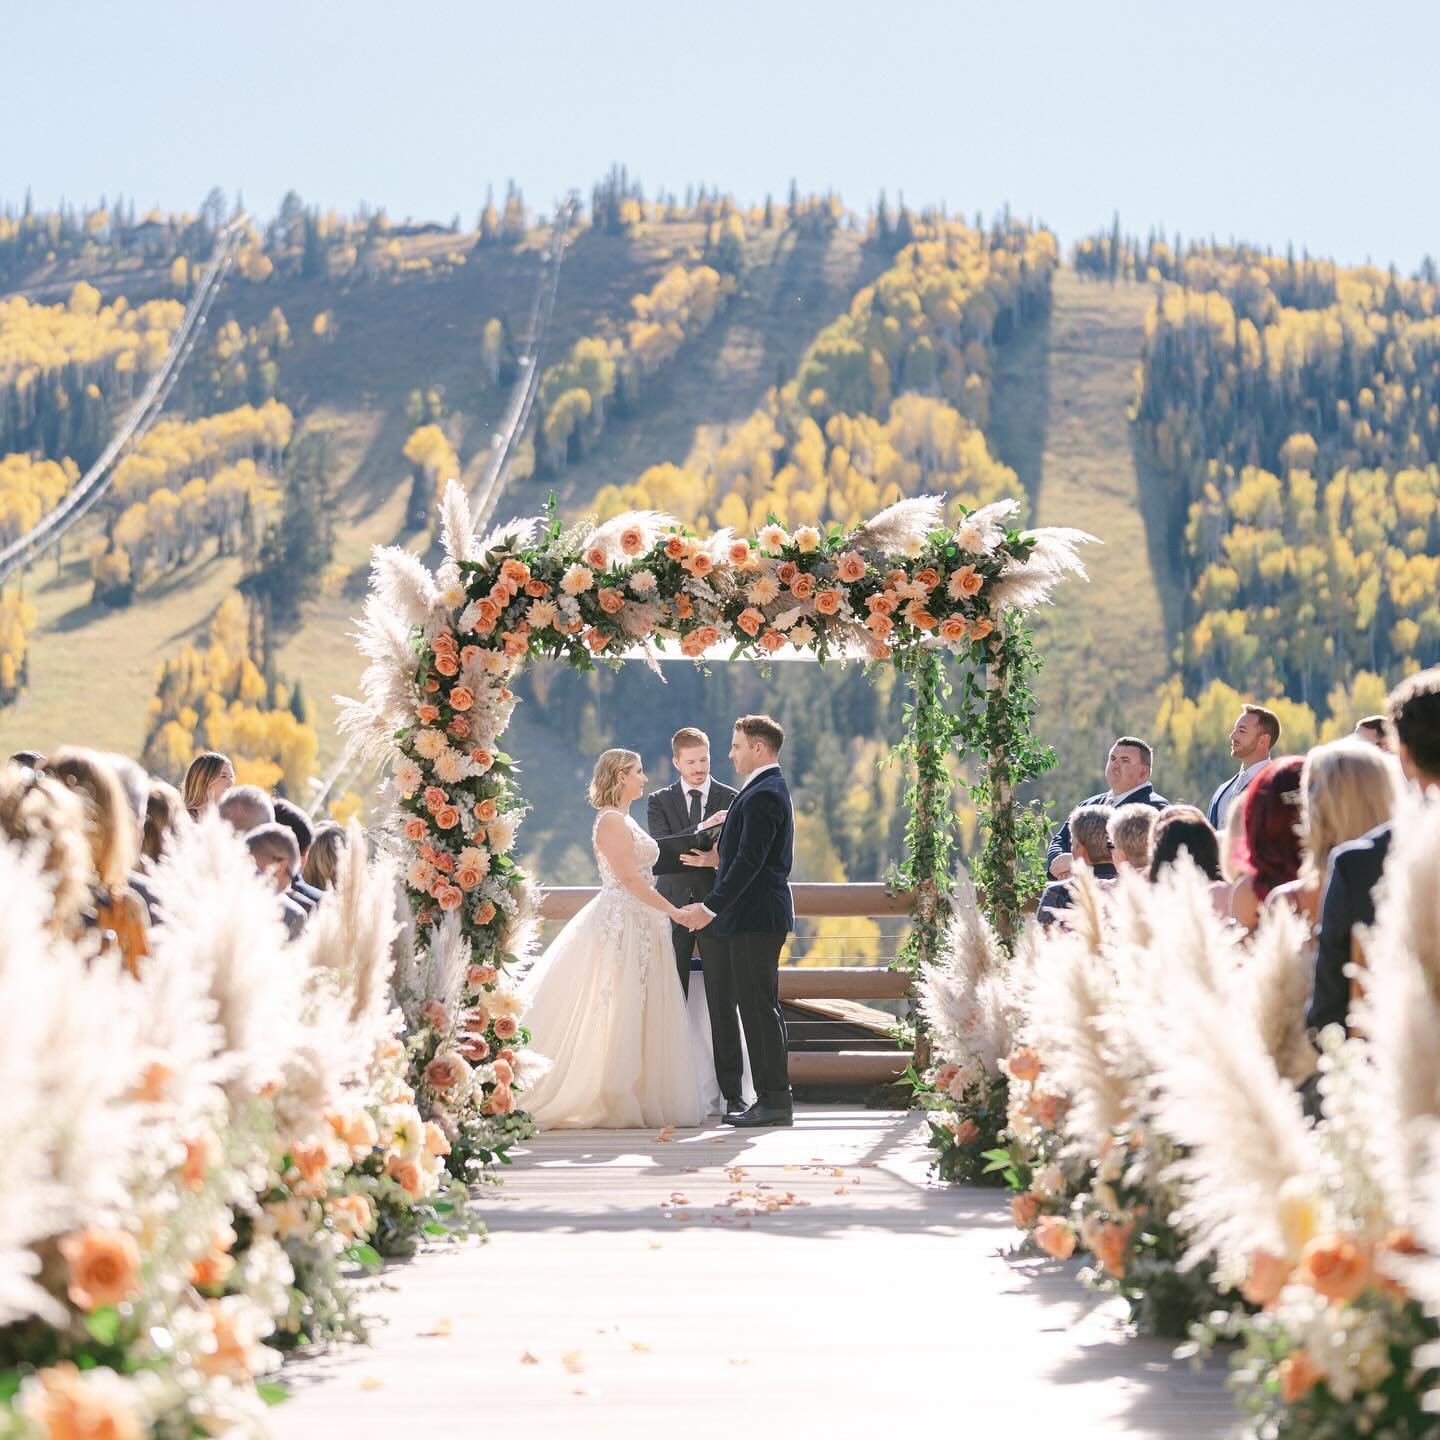 There&rsquo;s nothing like a fall wedding, but when we get that perfect back drop with our floral!? *chefs kiss 💋 we only get a short time period here in Utah for that autumn leaf background 😍🍁🍂

Vendors
Event planner/ designer: @soireeproduction